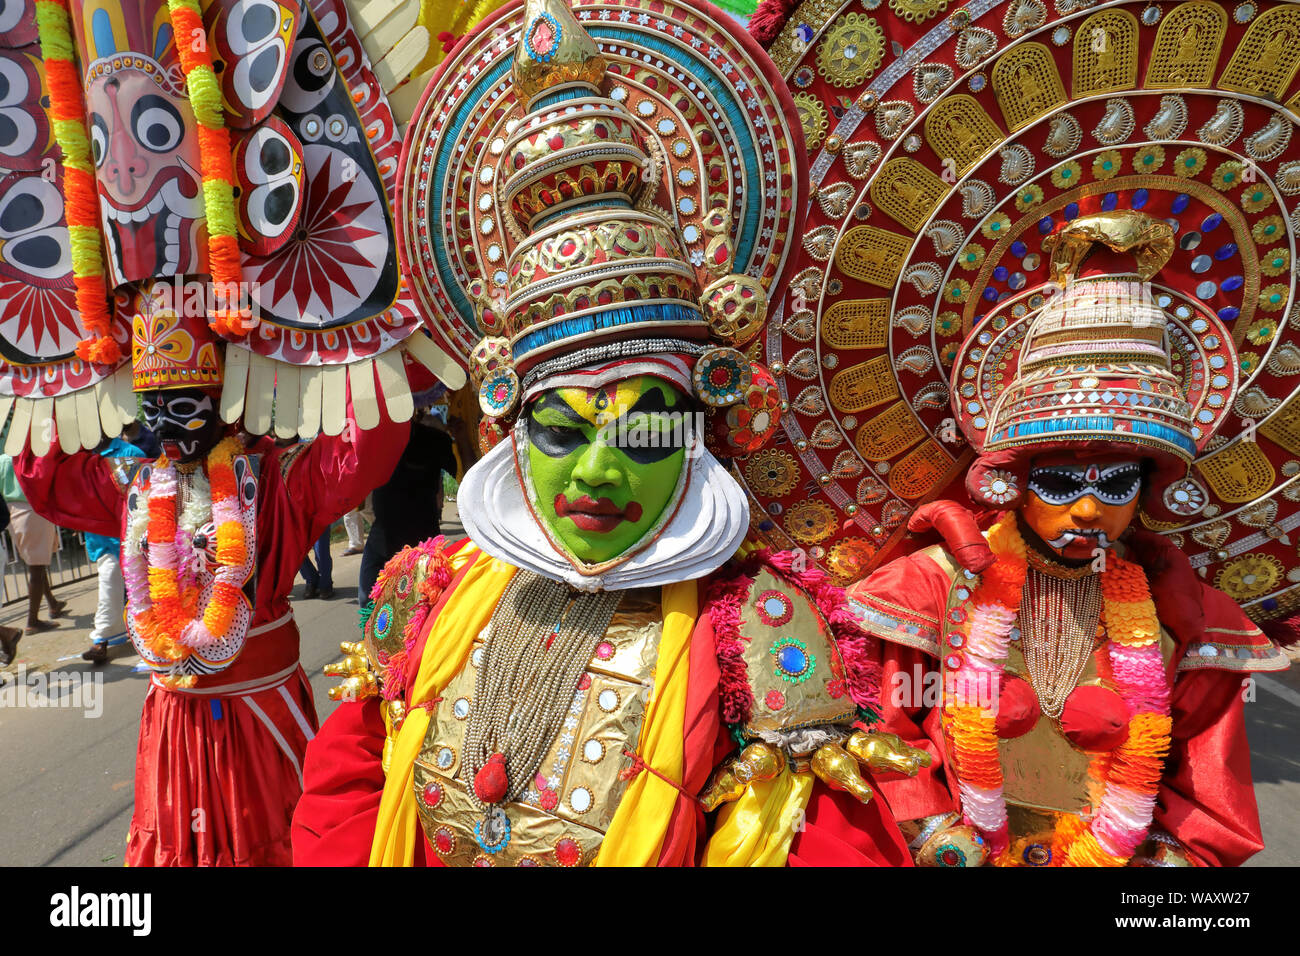 Dancers at a Theyyam and Kathakali ceremony near Kannur, India. Theyyam and Kathakali are popular ritualistic art forms in Kerala. Stock Photo